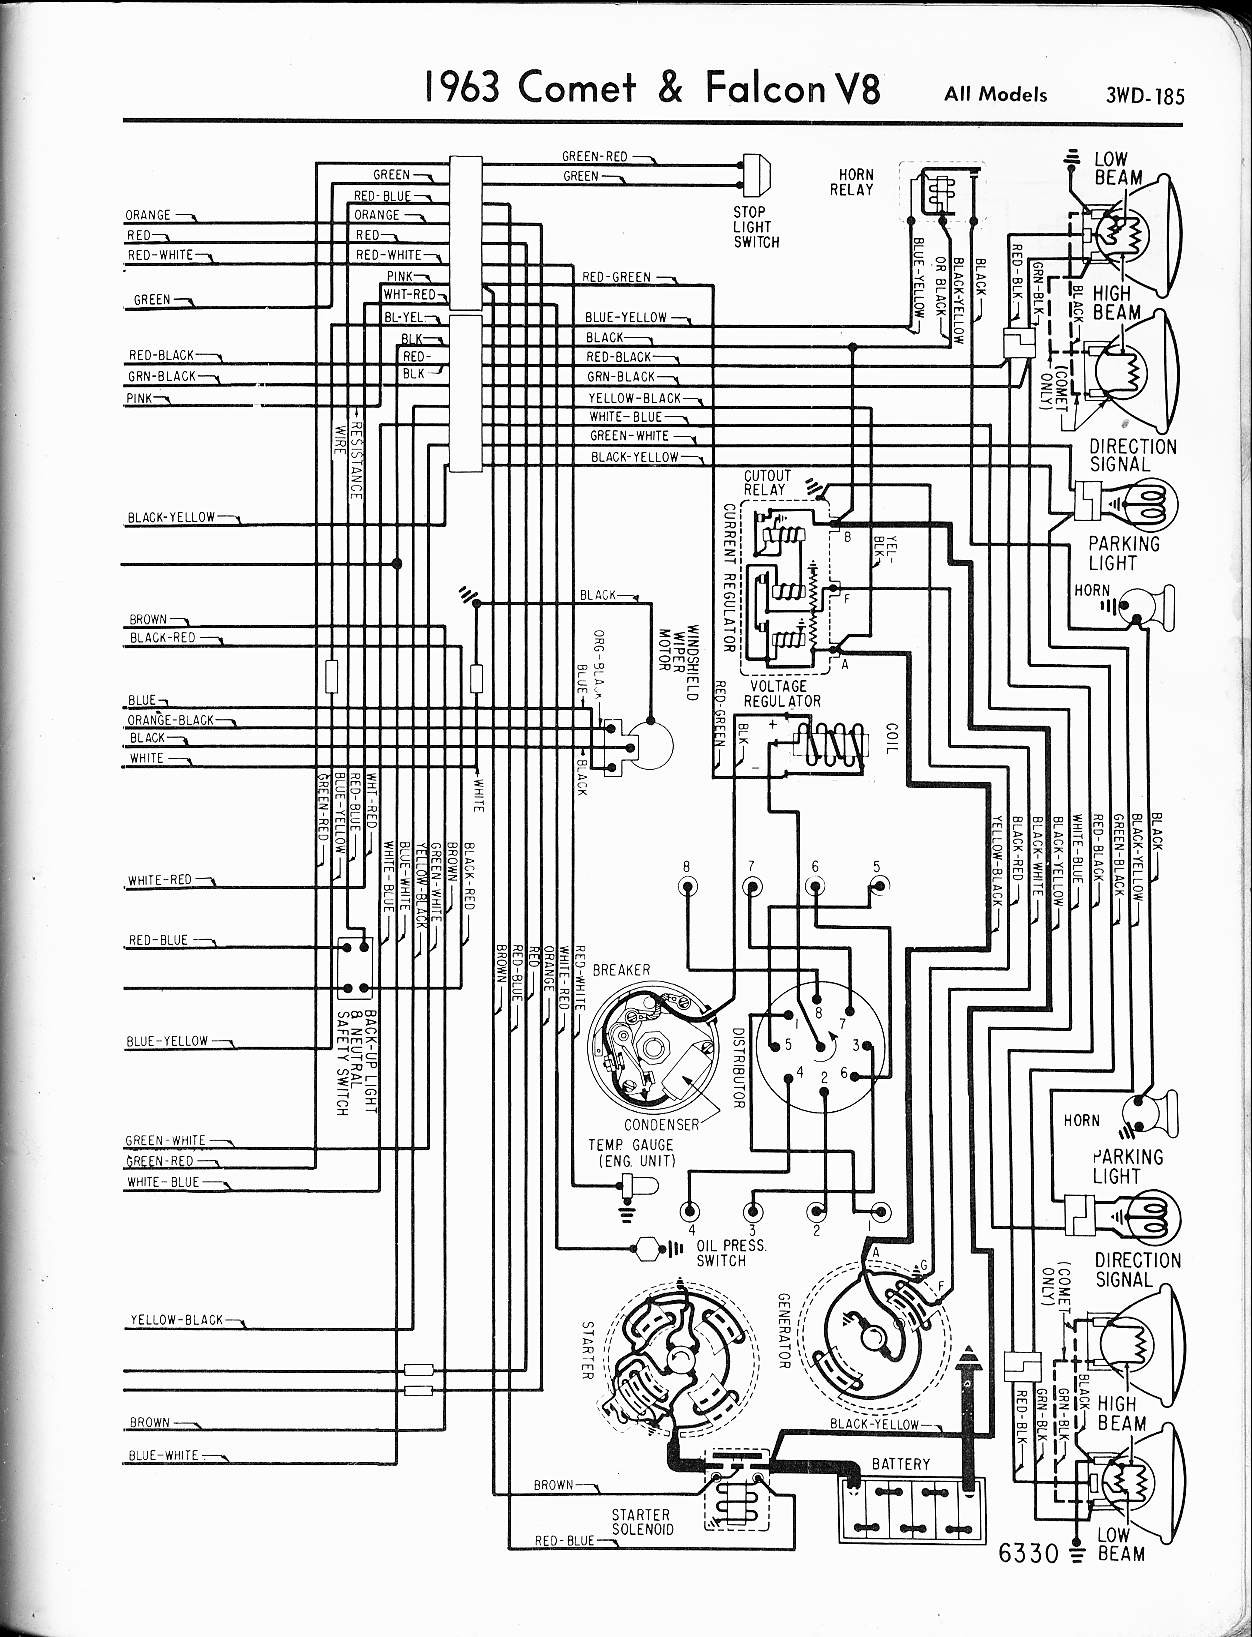 1964 ford 2000 tractor wiring diagram Collection 1963 V8 Falcon right 4 i